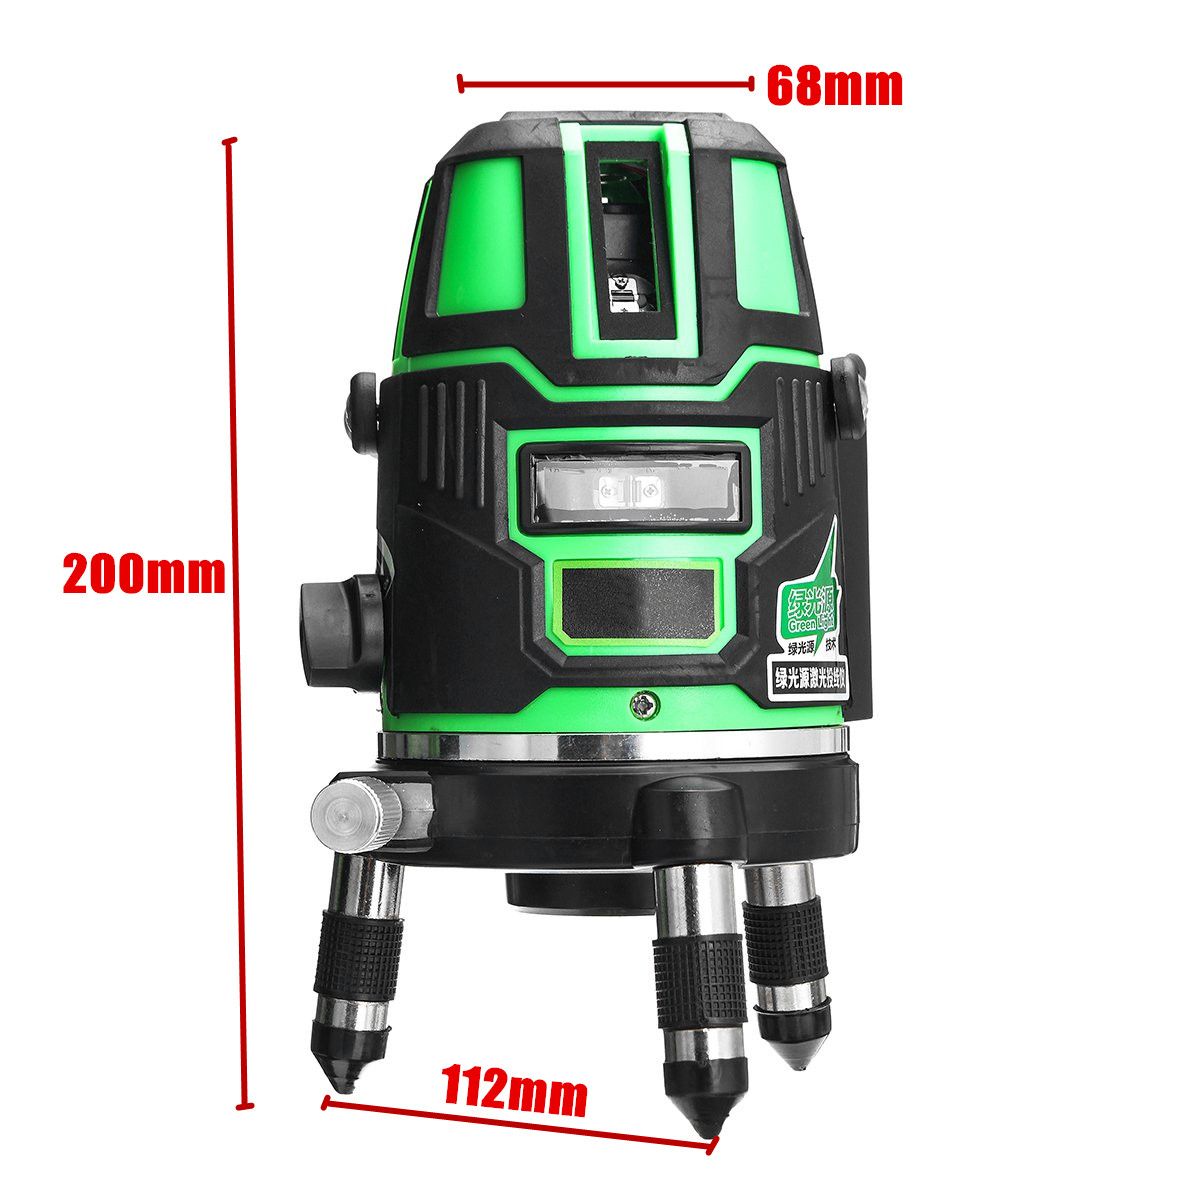 235-Green-Line-Laser-Level-Vertical-Horizontal-Leveling-Rotary-Outdoor-Cross-Measure-1324290